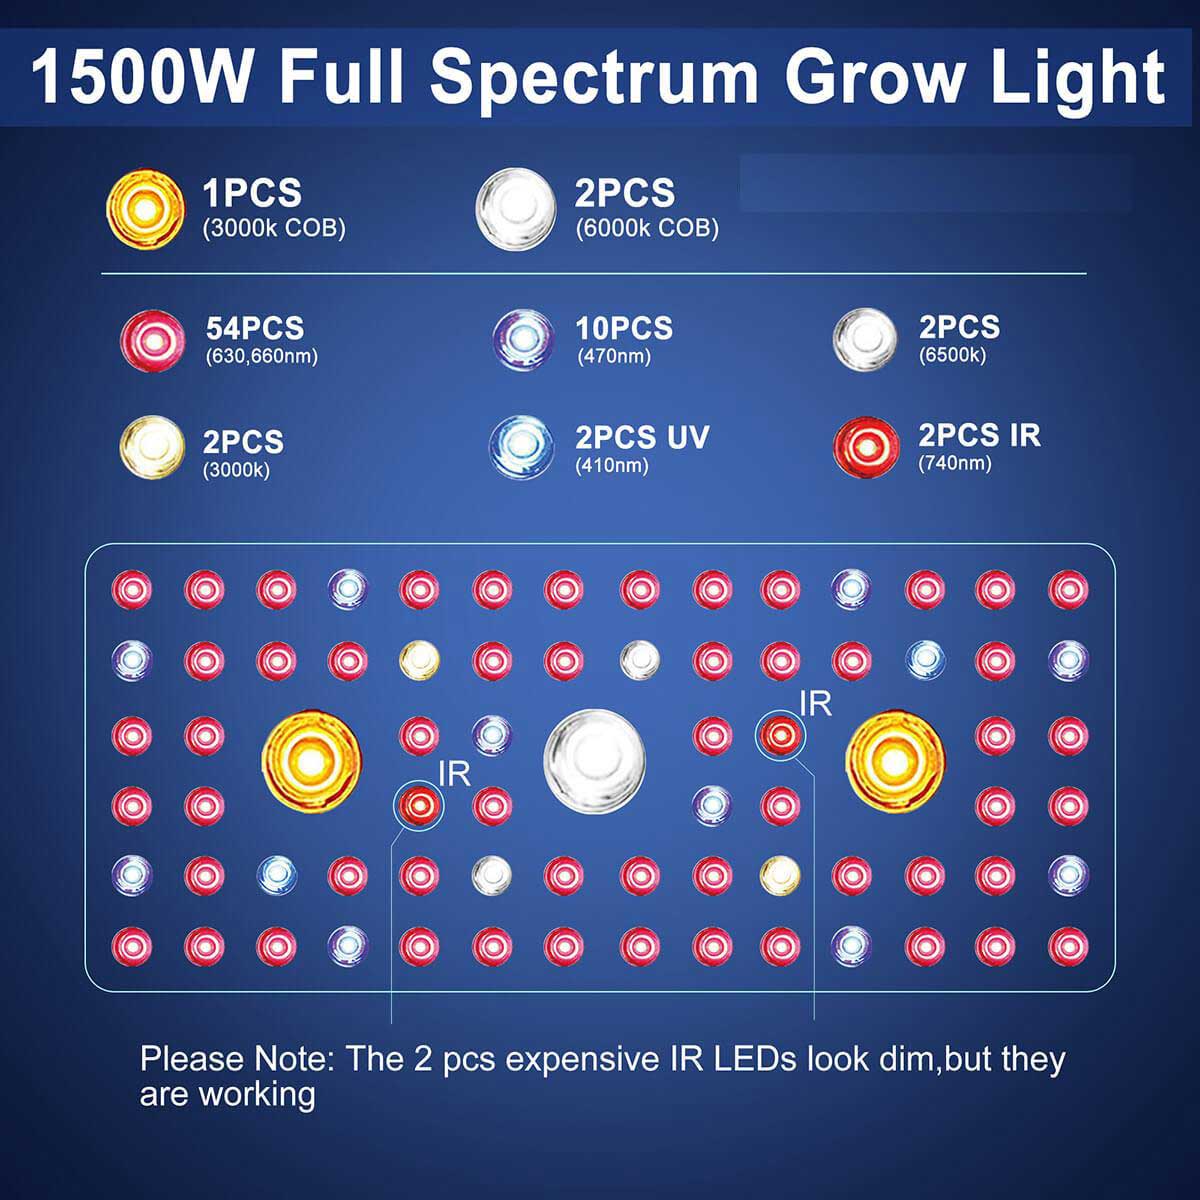 PHLIZON FD7500 720W Full-spectrum Dimmable LED Grow Light with Samsung